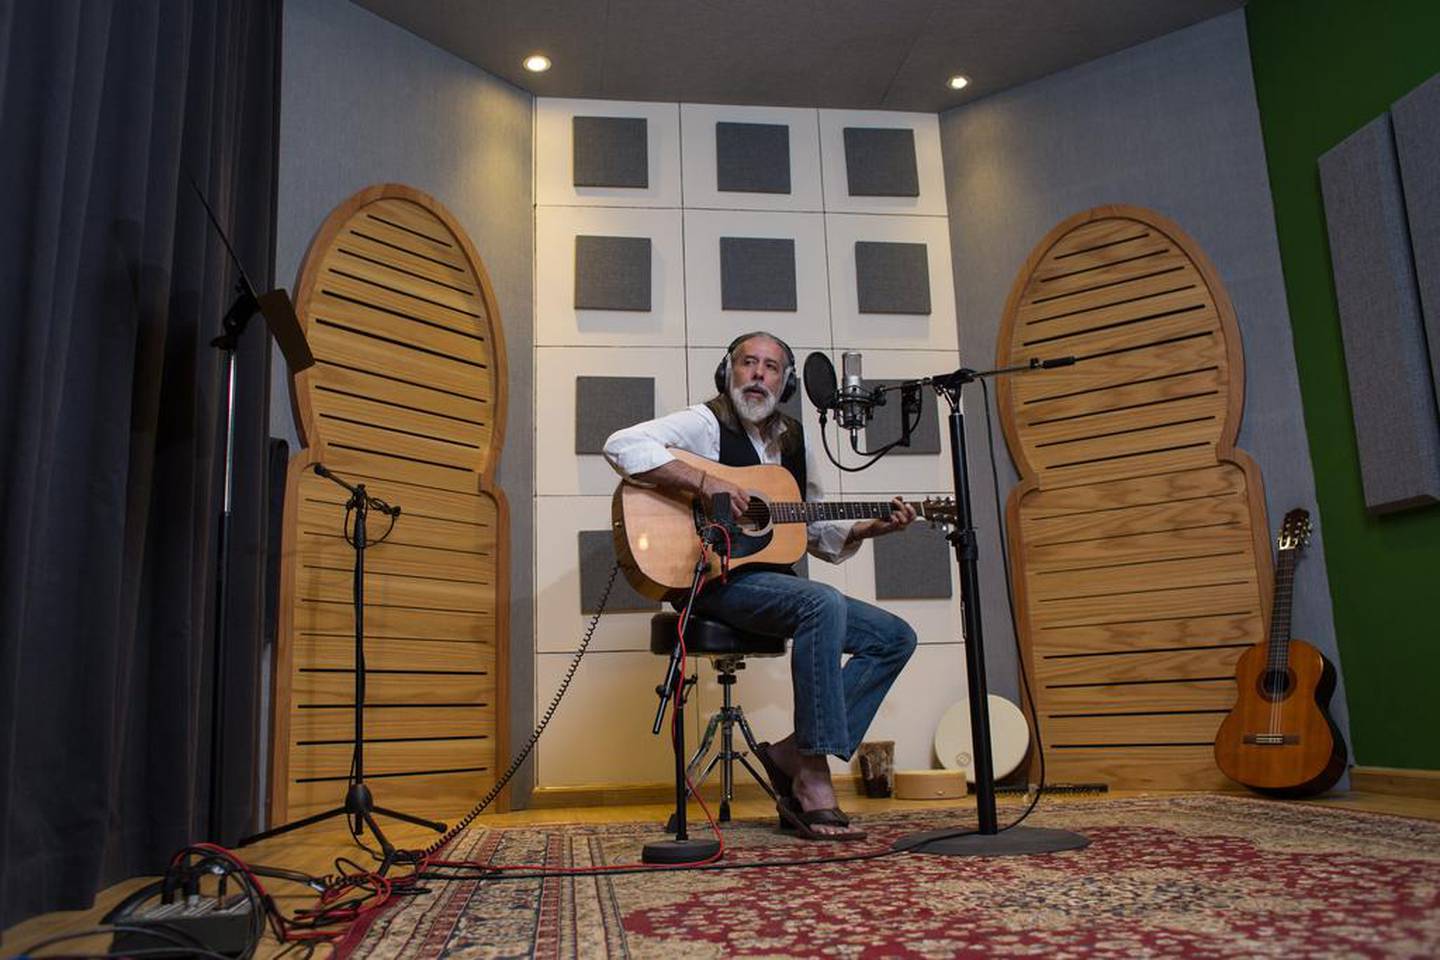 Idris Phillips recording his album 'Star by Moon'. Clint McLean for The National

